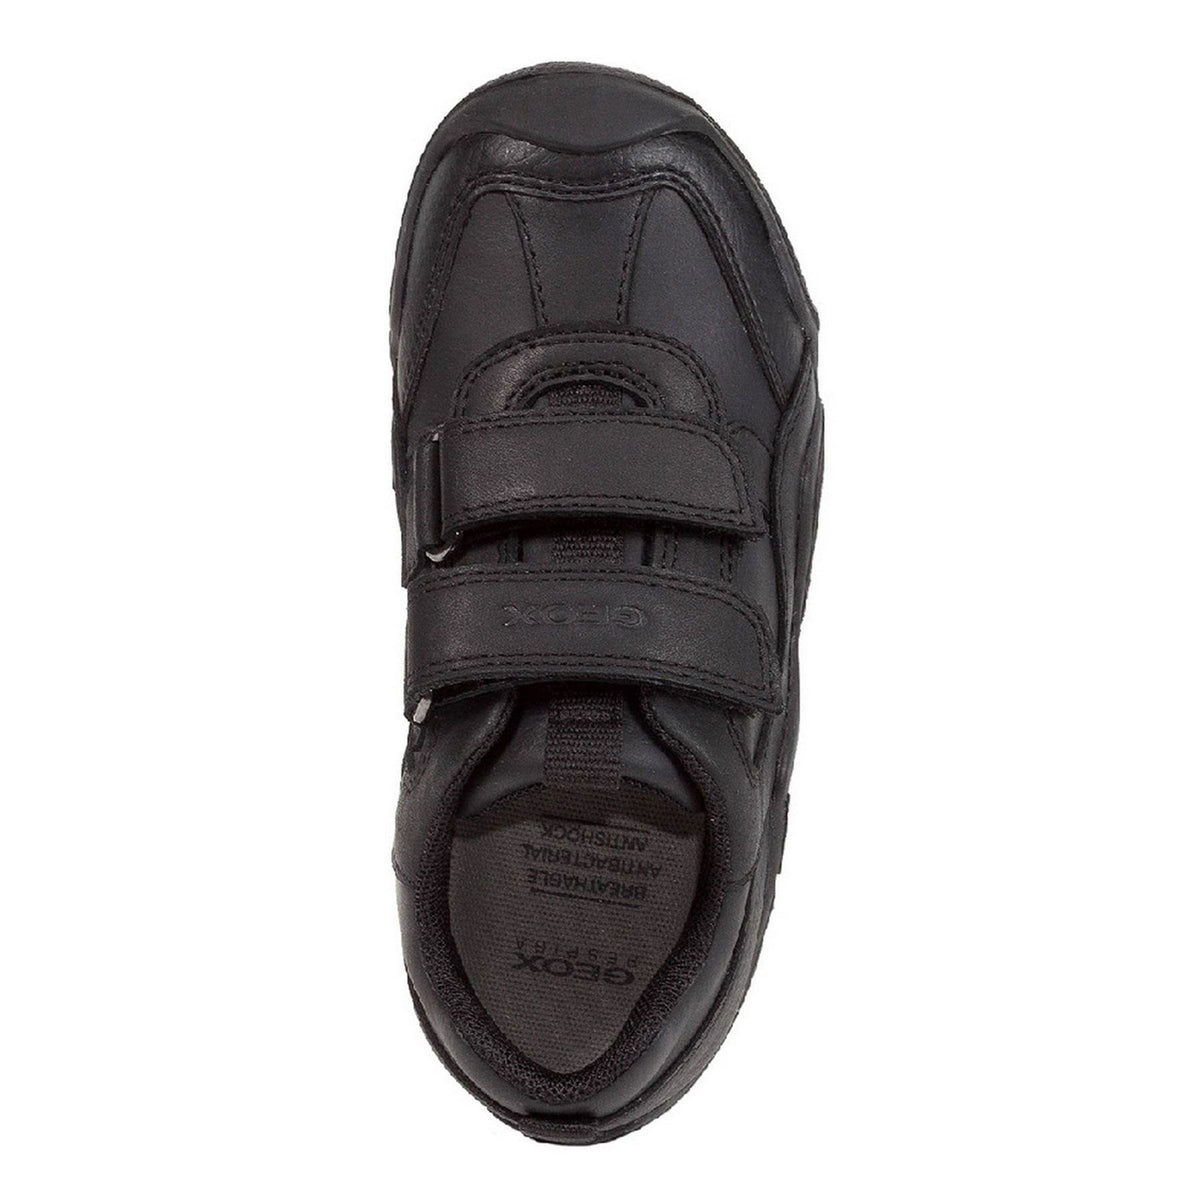 Geox Boys School J Wader A Touch Fastening Shoes